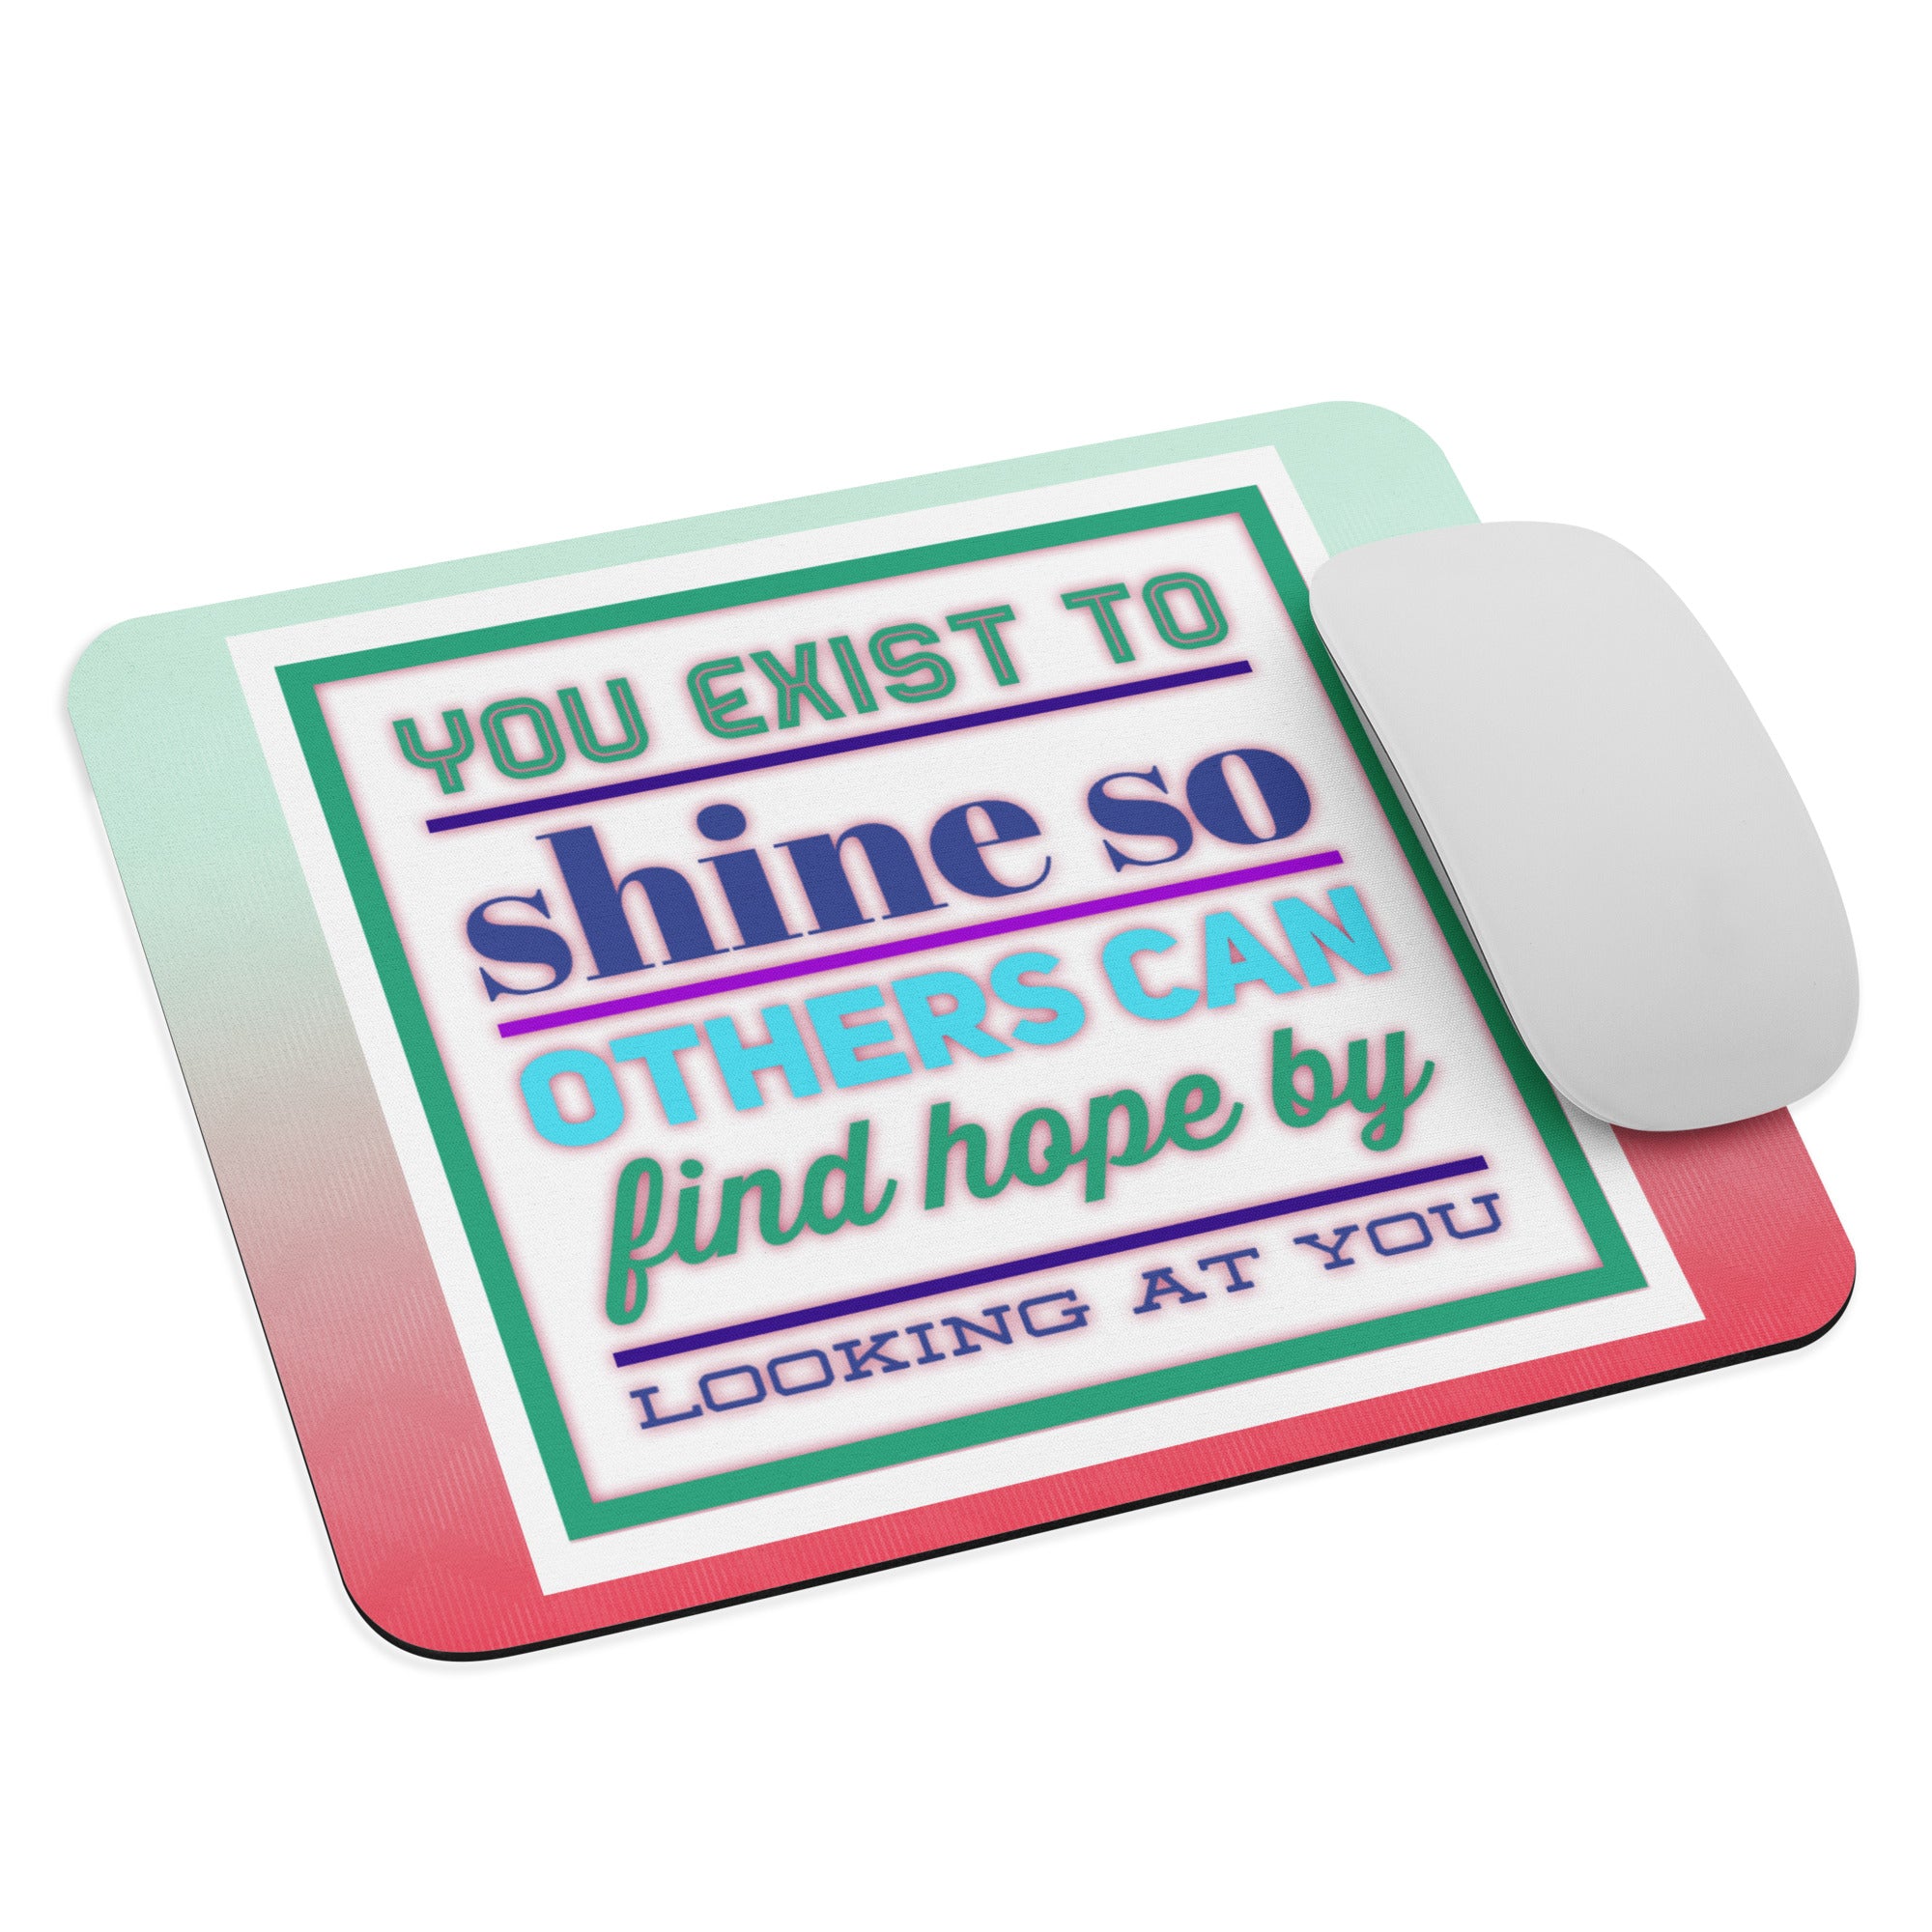 GloWell Designs - Mouse Pad - Motivational Quote - You Exist to Shine - GloWell Designs